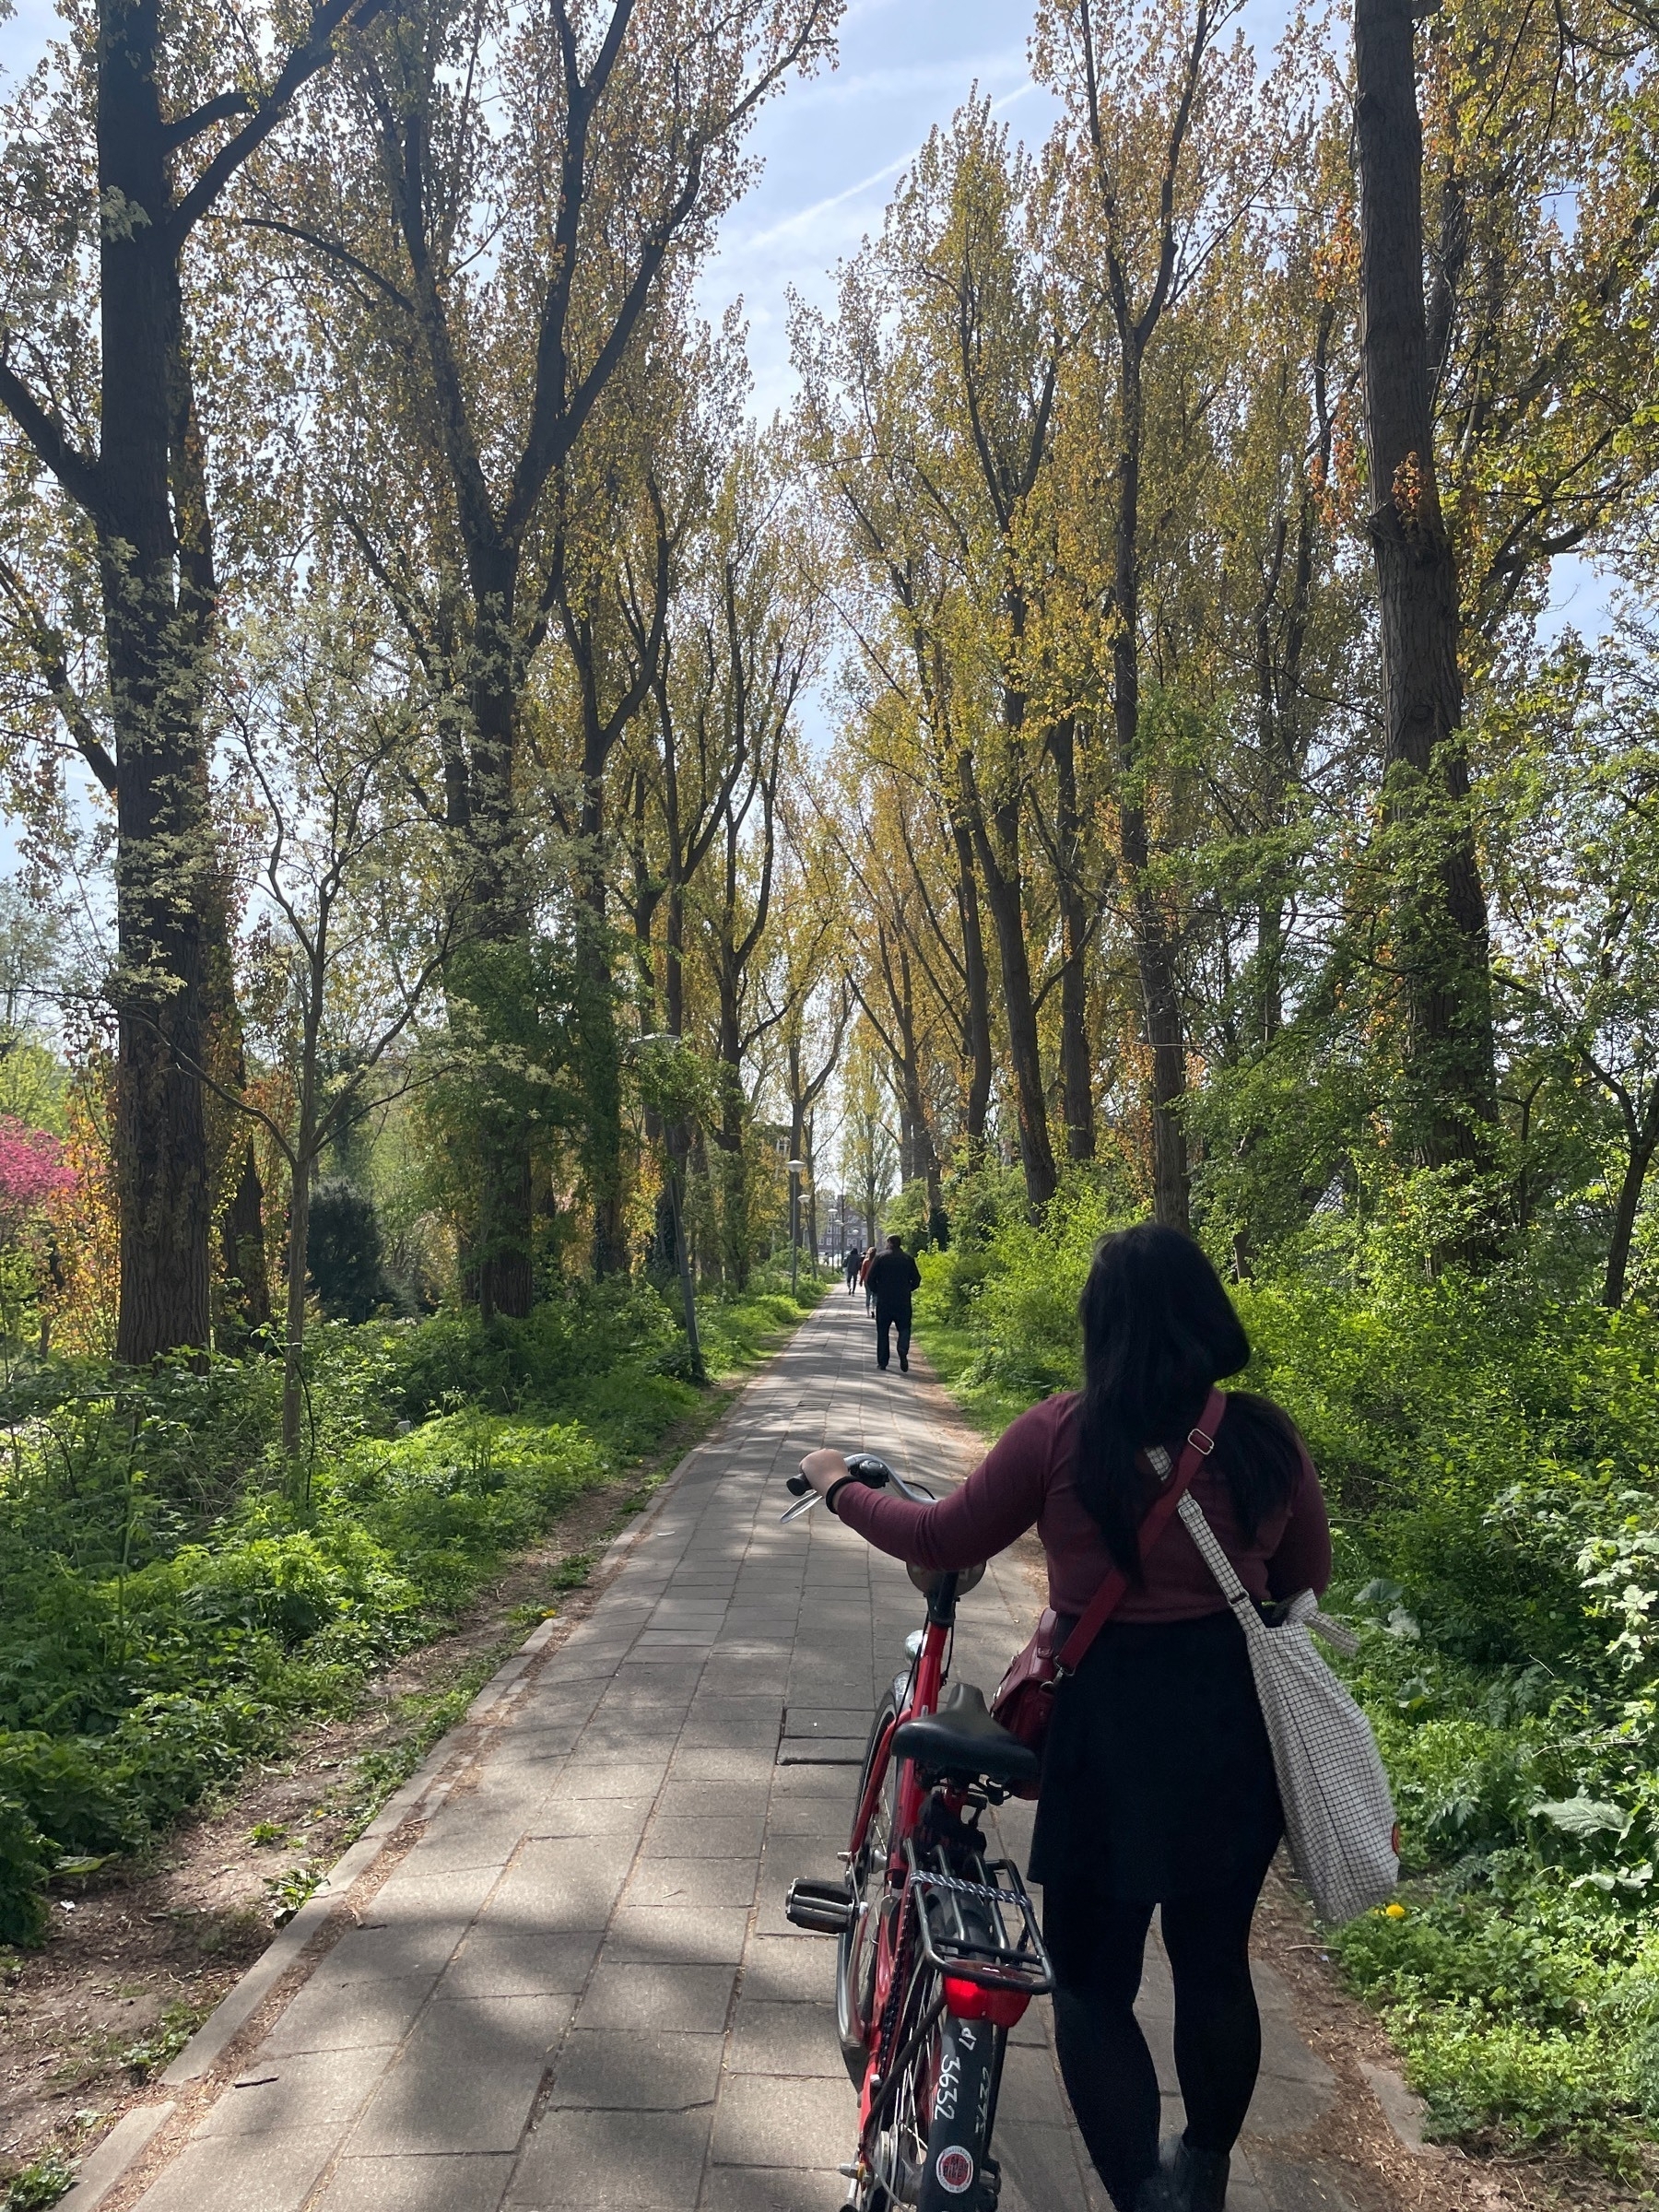 Chi is seen walking and pushing a Dutch bike to her left, while along a bike path somewhere in Amsterdam. The path continues on straight, and lots of trees can be seen lining up both sides of the bike path, providing ample shade from the sun.